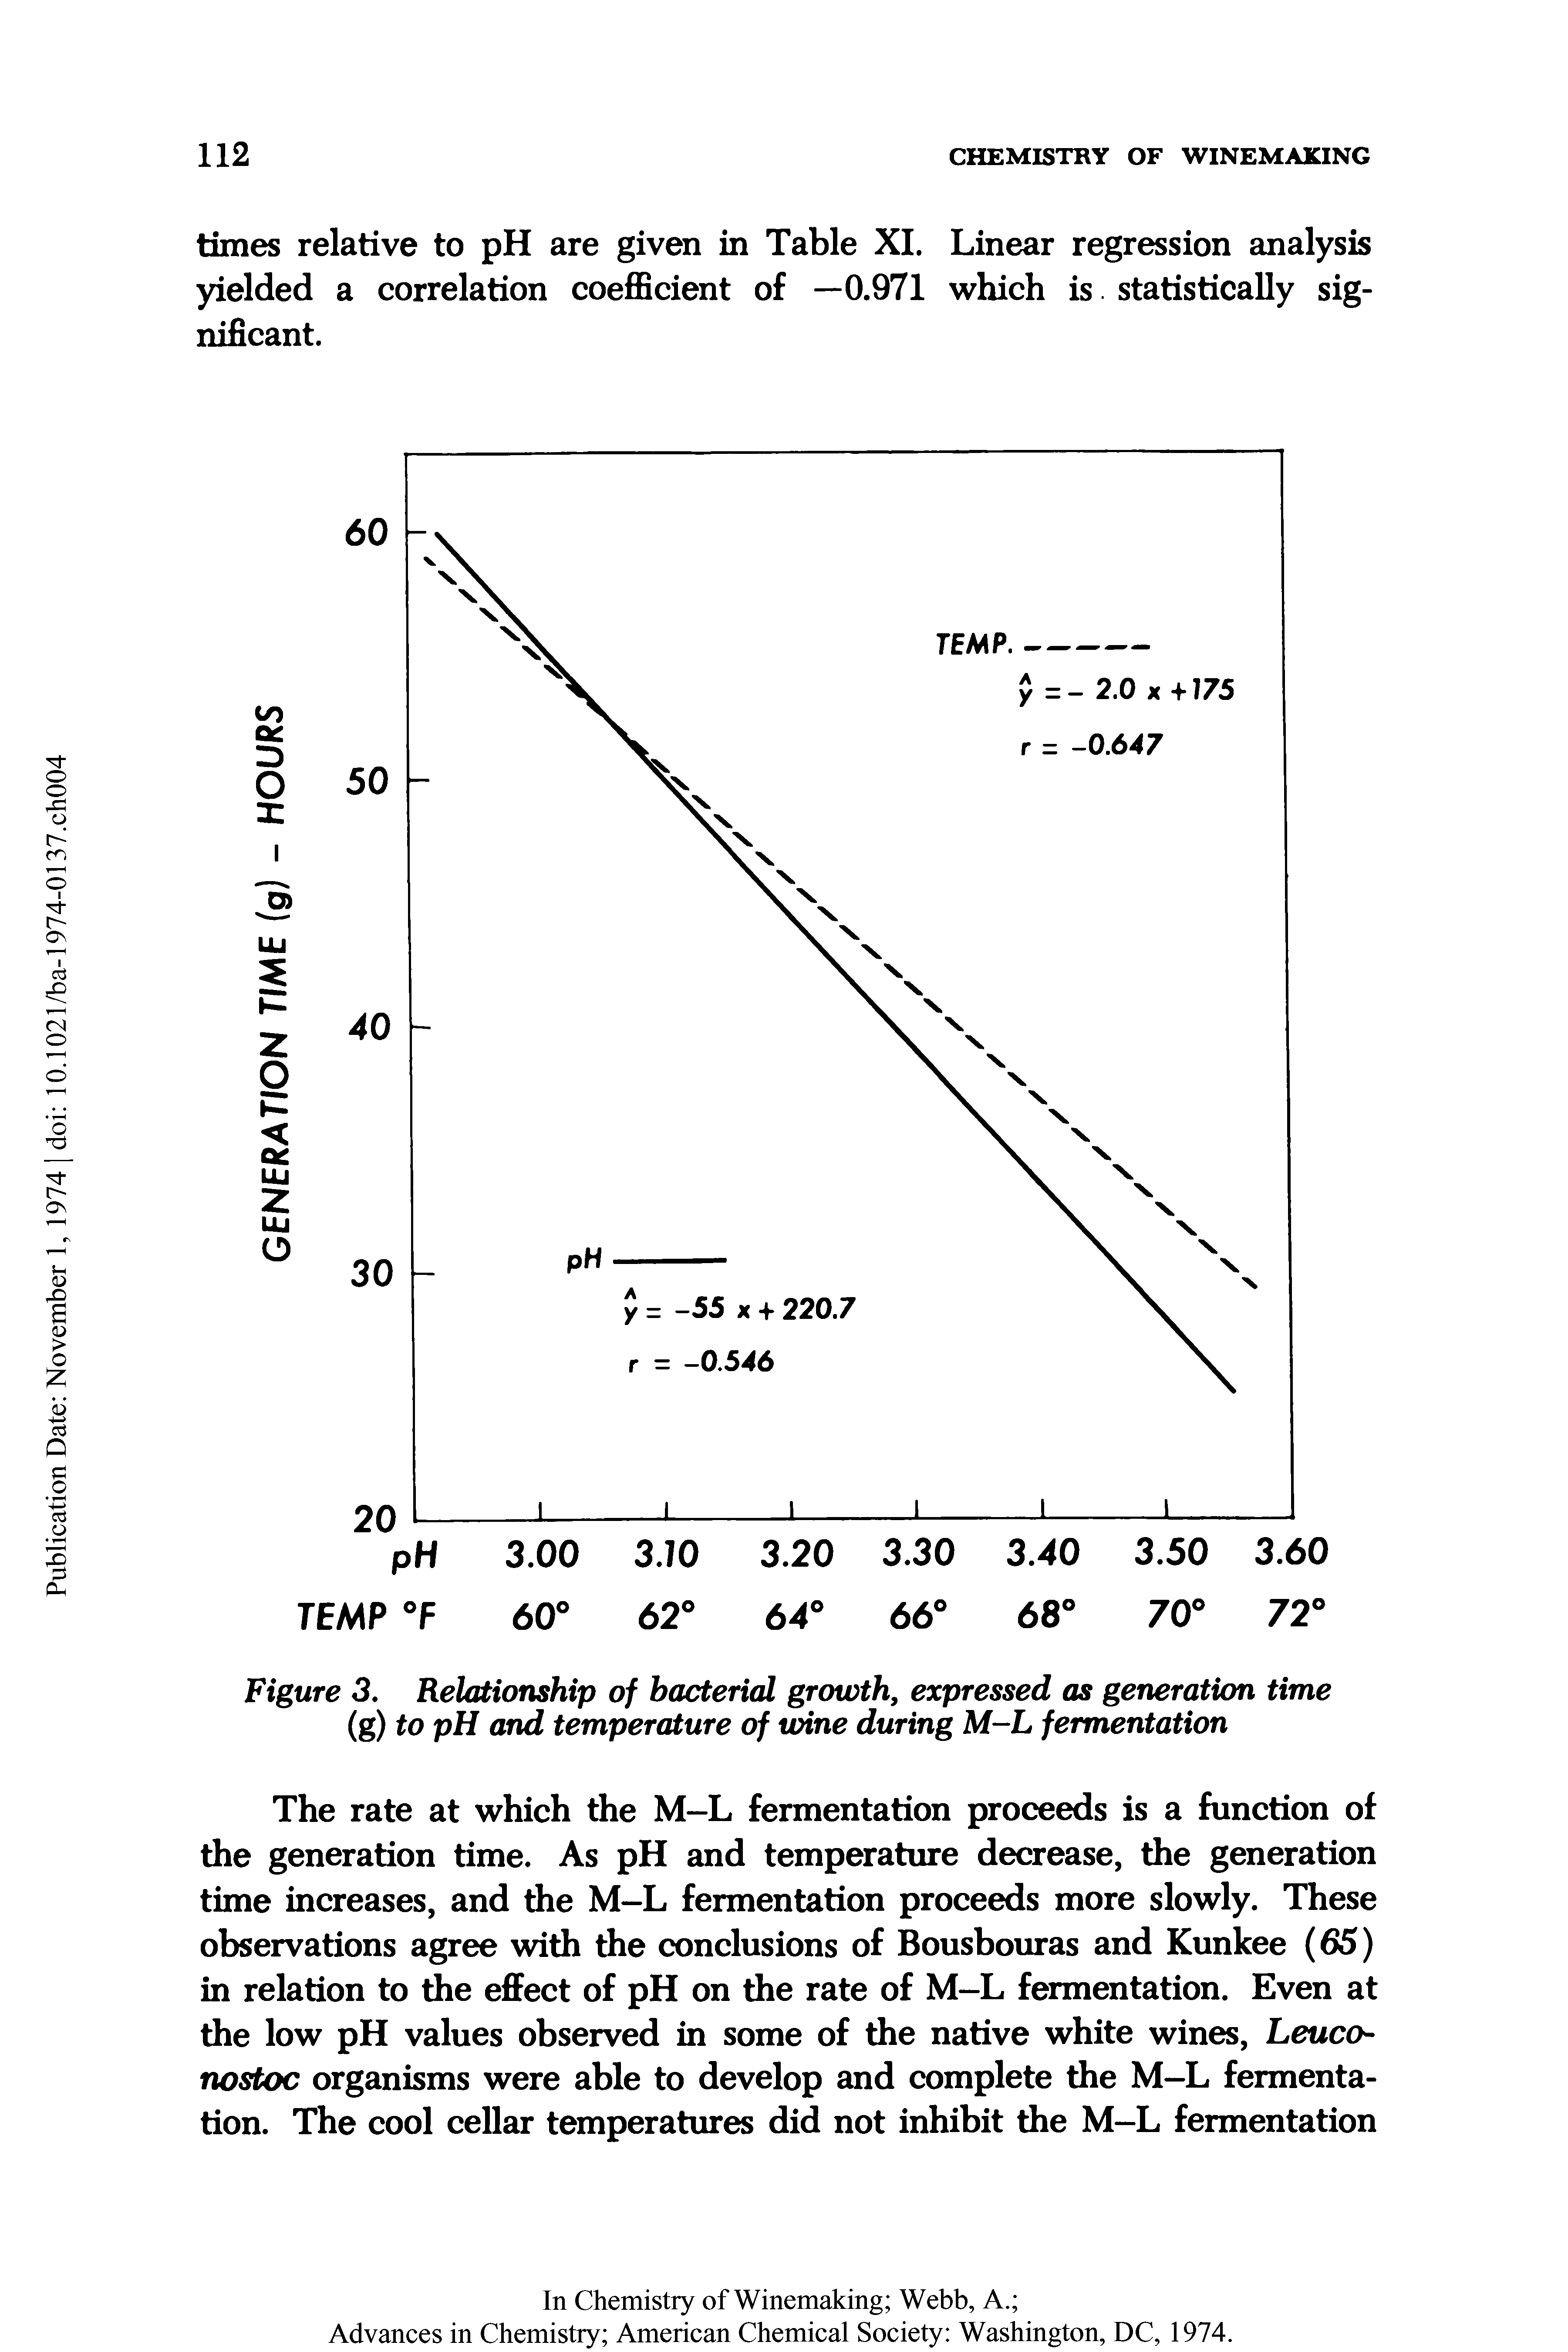 Figure 3. Relationship of bacterial growth, expressed as generation time (g) to pH and temperature of wine during M-L fermentation...